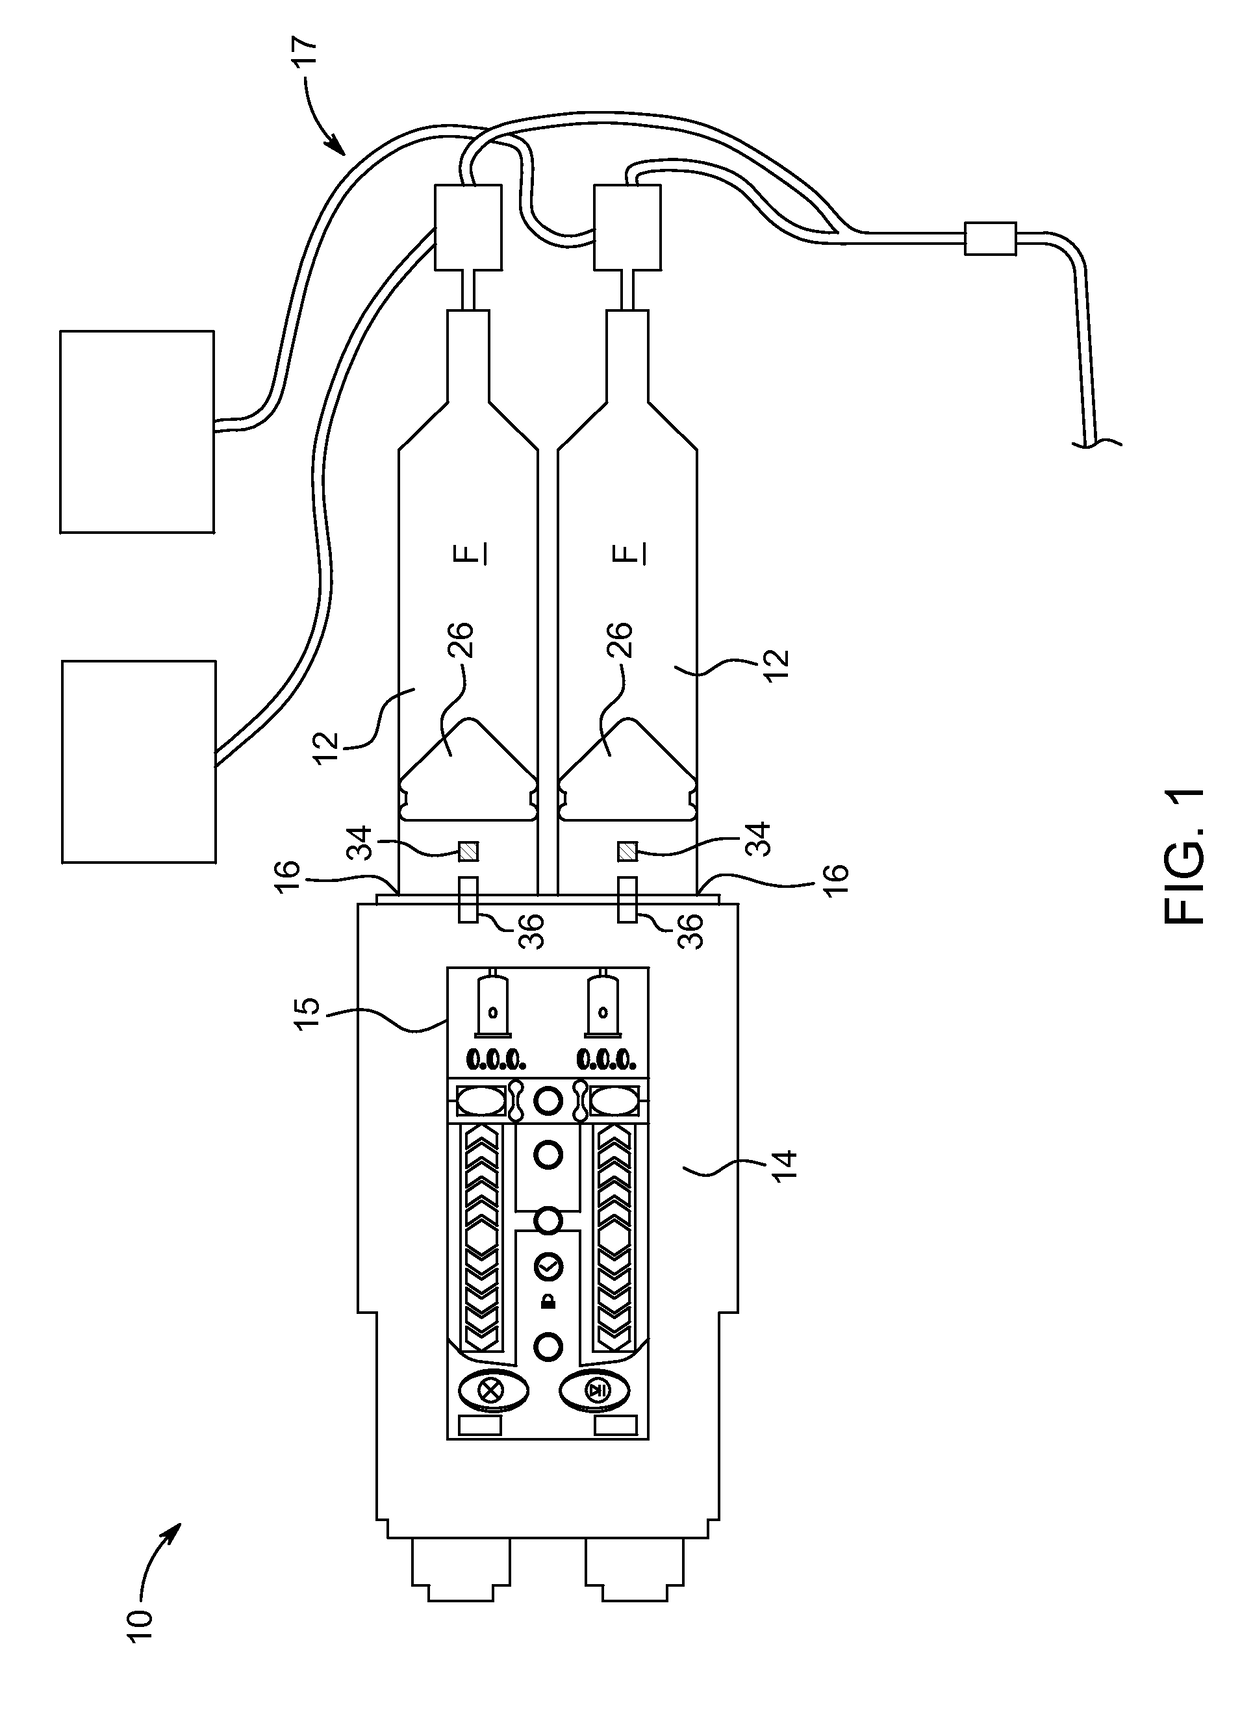 Syringe and fluid injection system with an orientation independent identification code